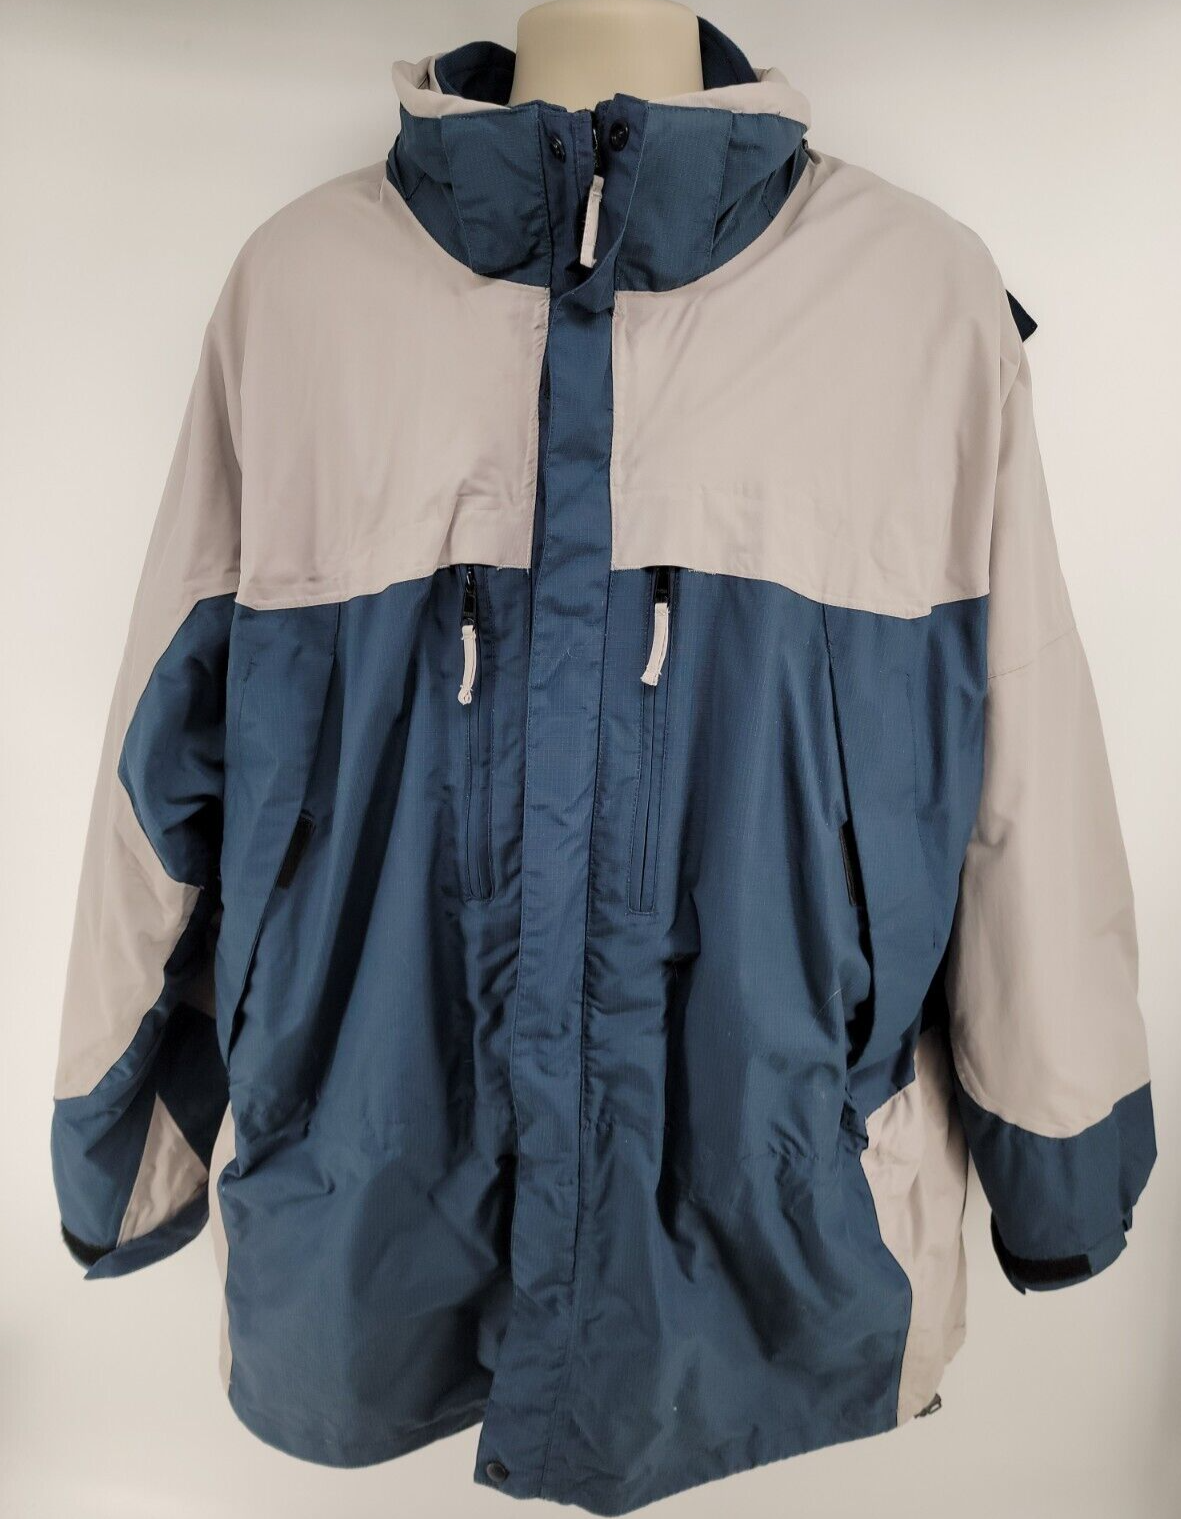 Primary image for George Foreman 3 In 1 Jacket Coat Parka Size 2XL